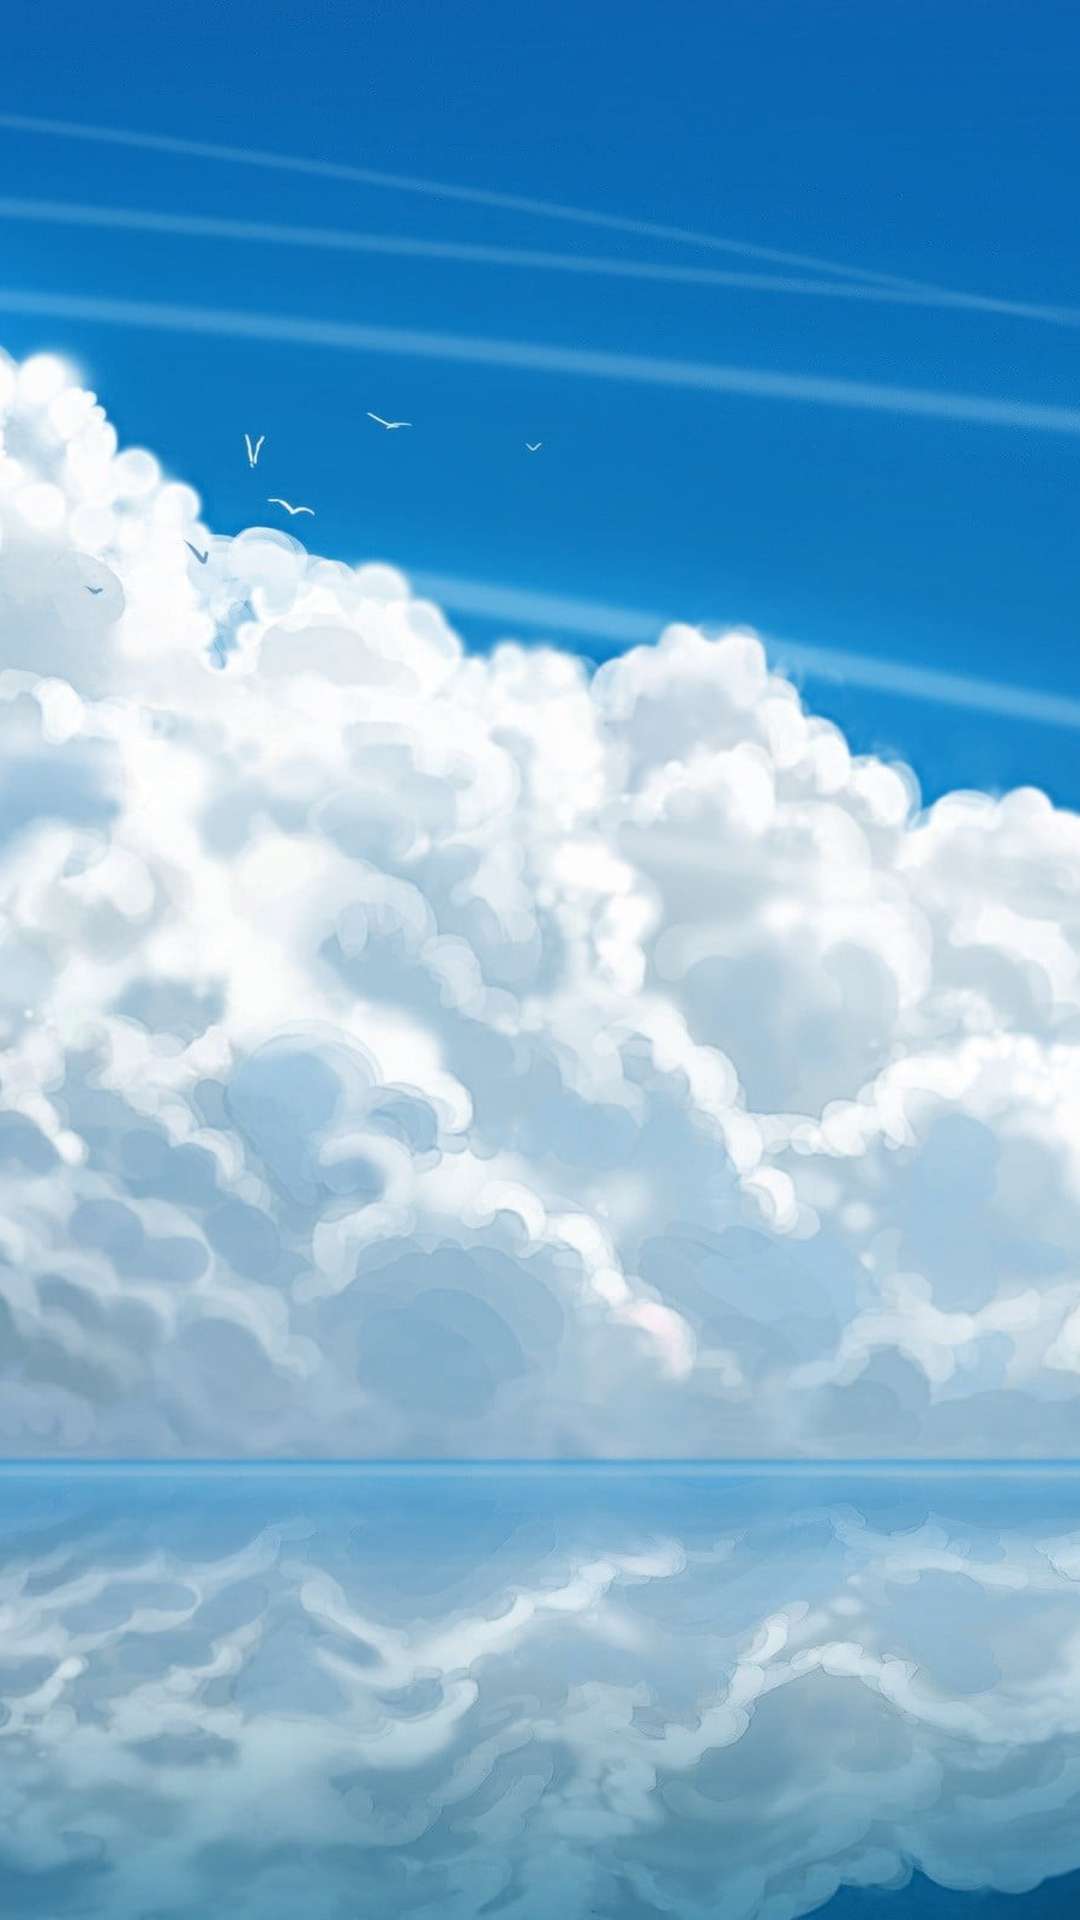 Wallpaper Anime Cloud Water Atmosphere Daytime Background  Download  Free Image